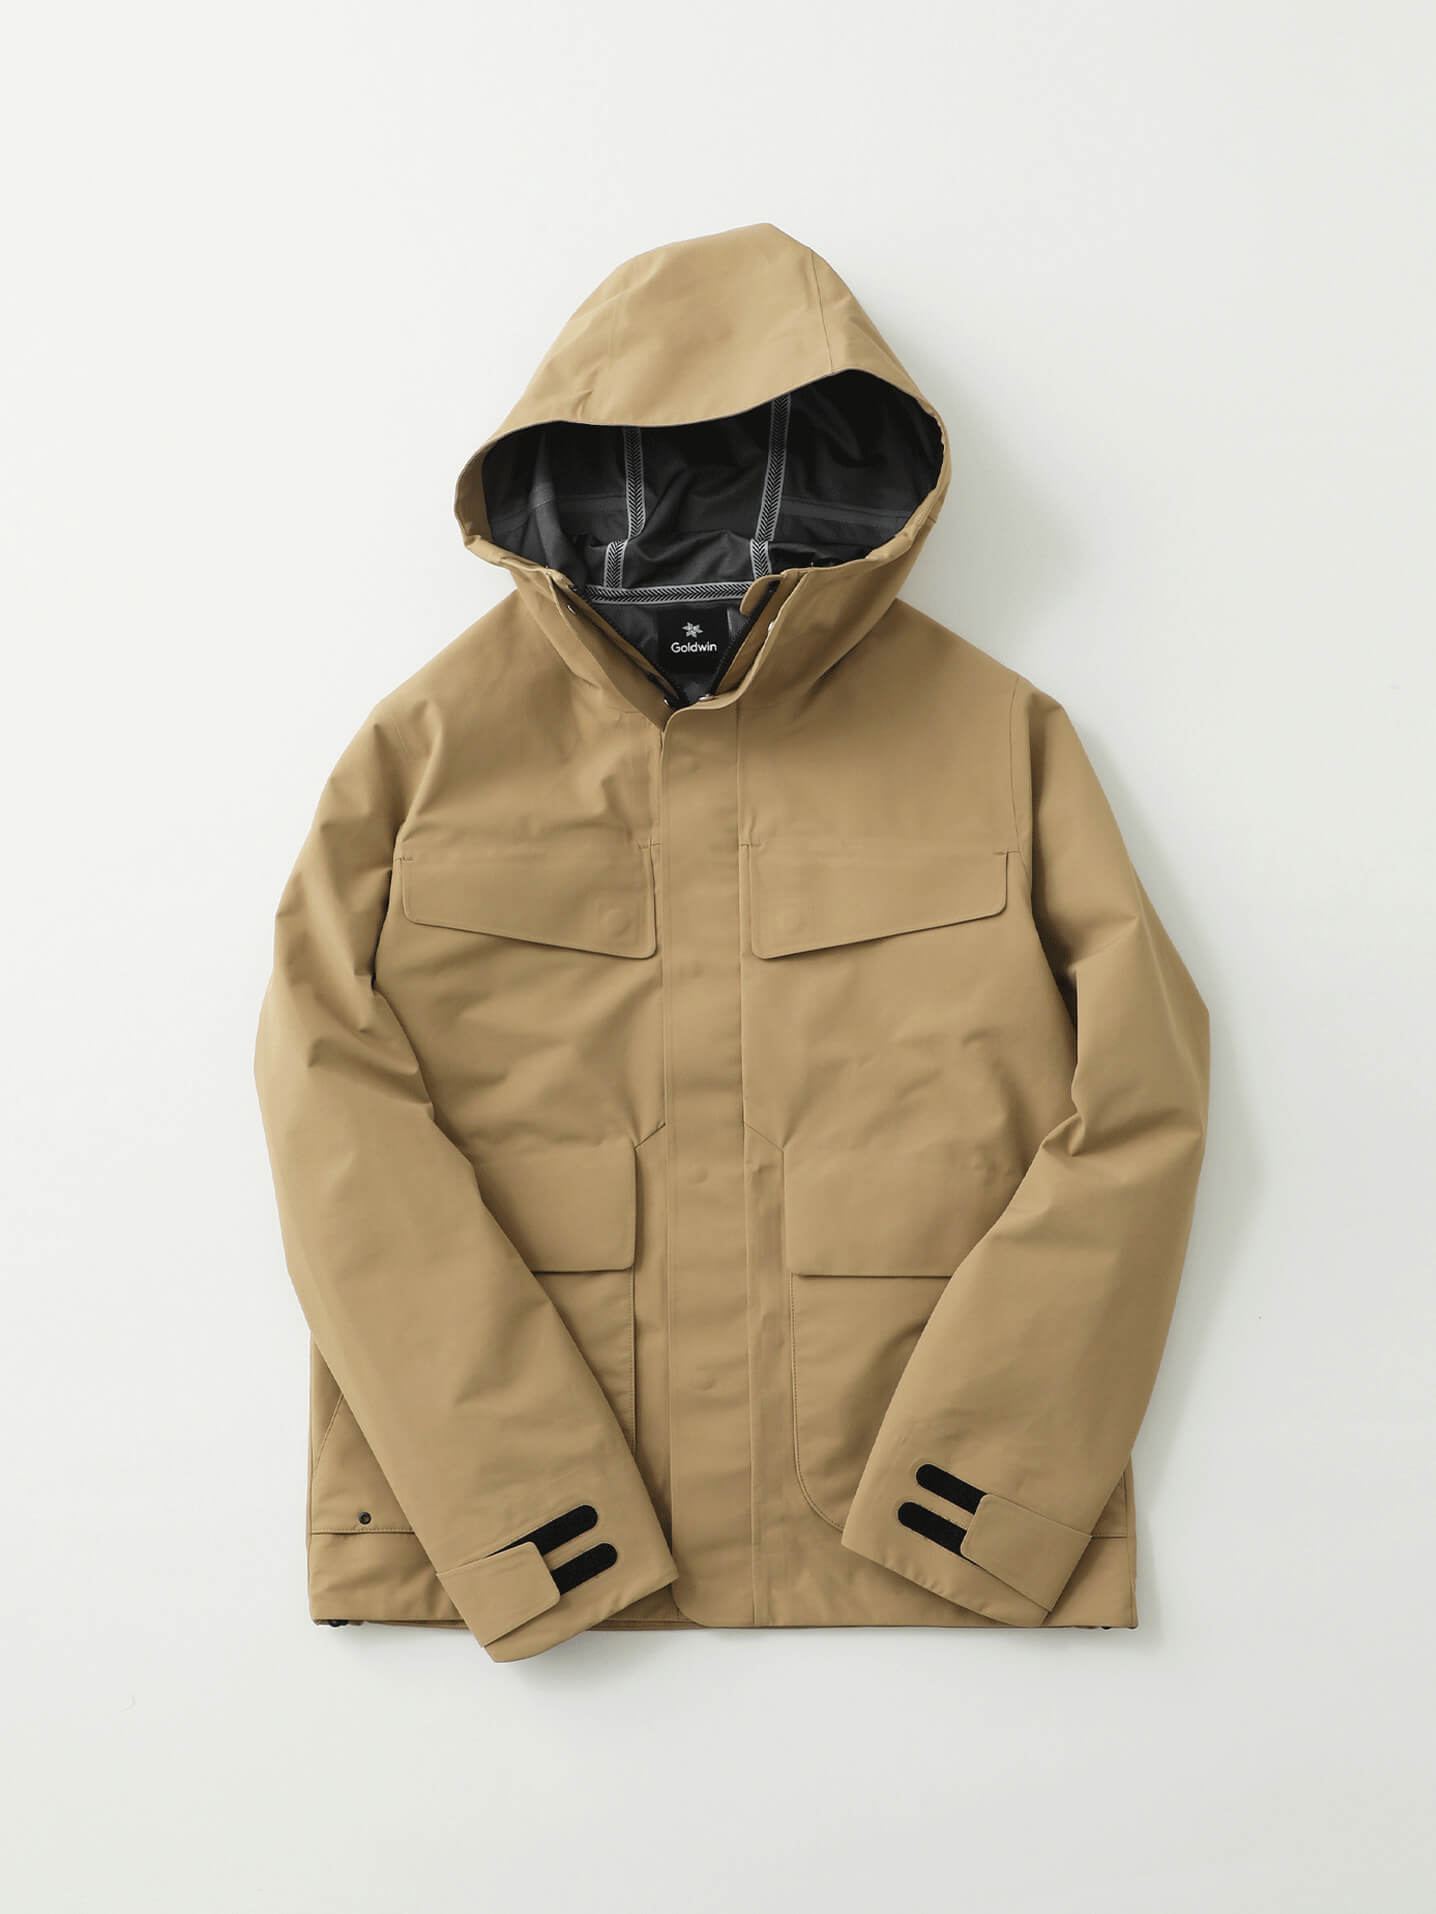 GORE-TEX Hooded Mountain Jacket｜Reinterpreting the Definition of 